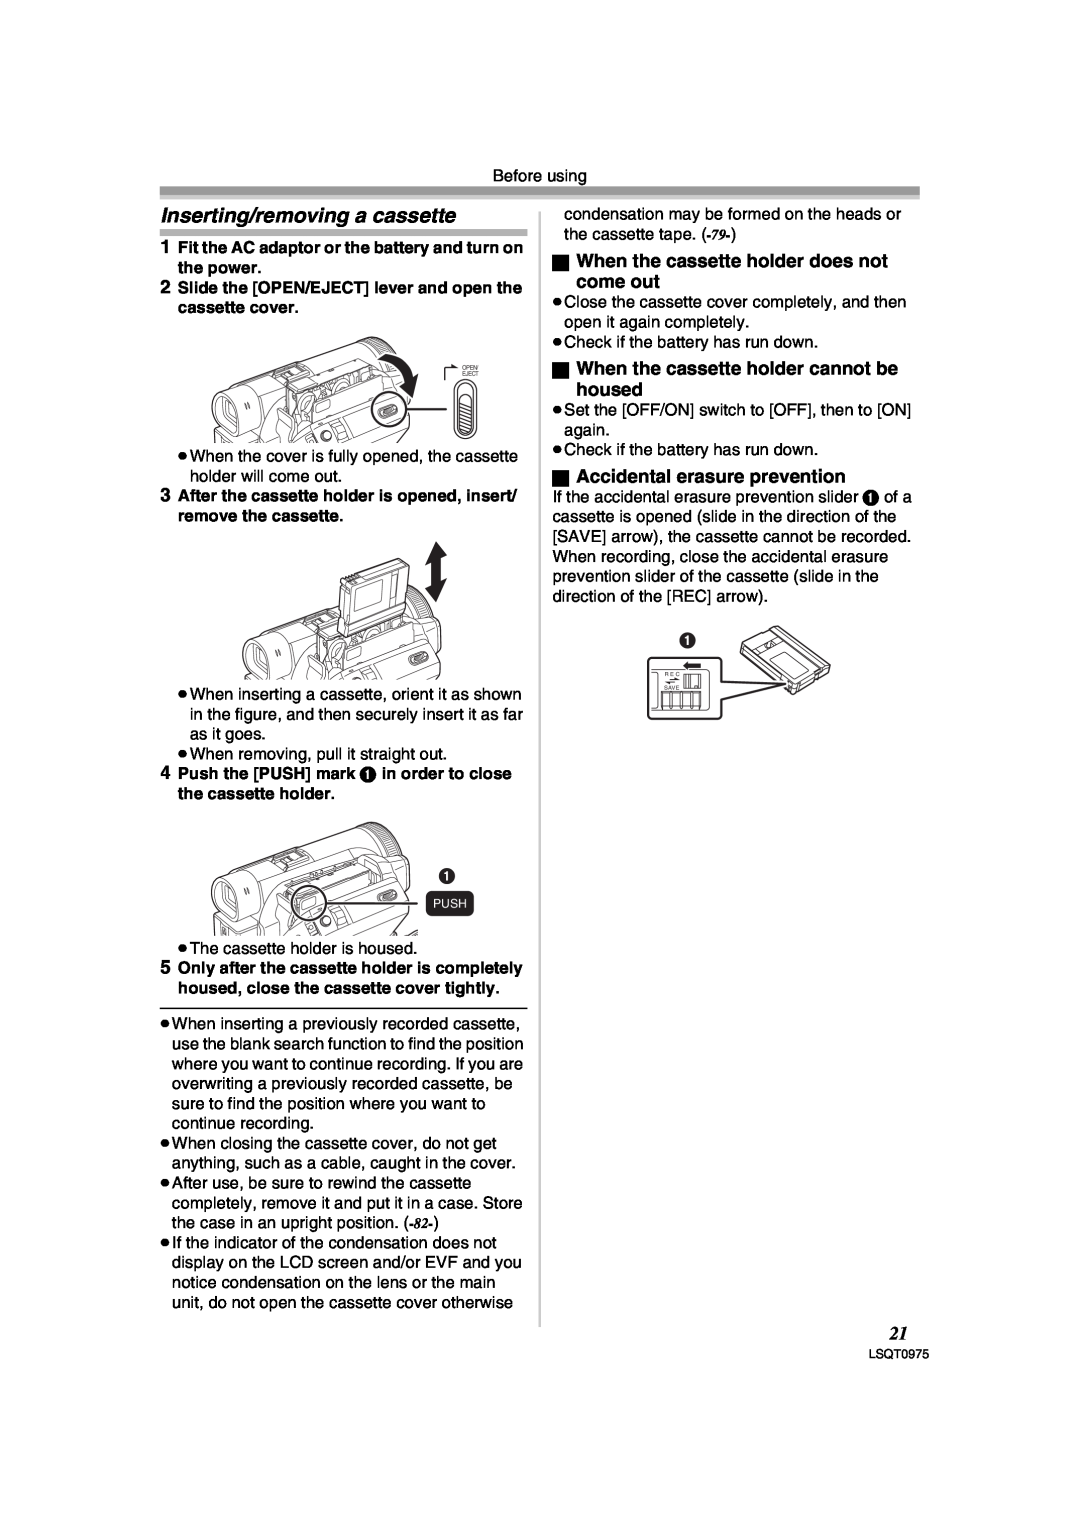 Panasonic PV-GS500 operating instructions Inserting/removing a cassette, ª When the cassette holder does not come out 